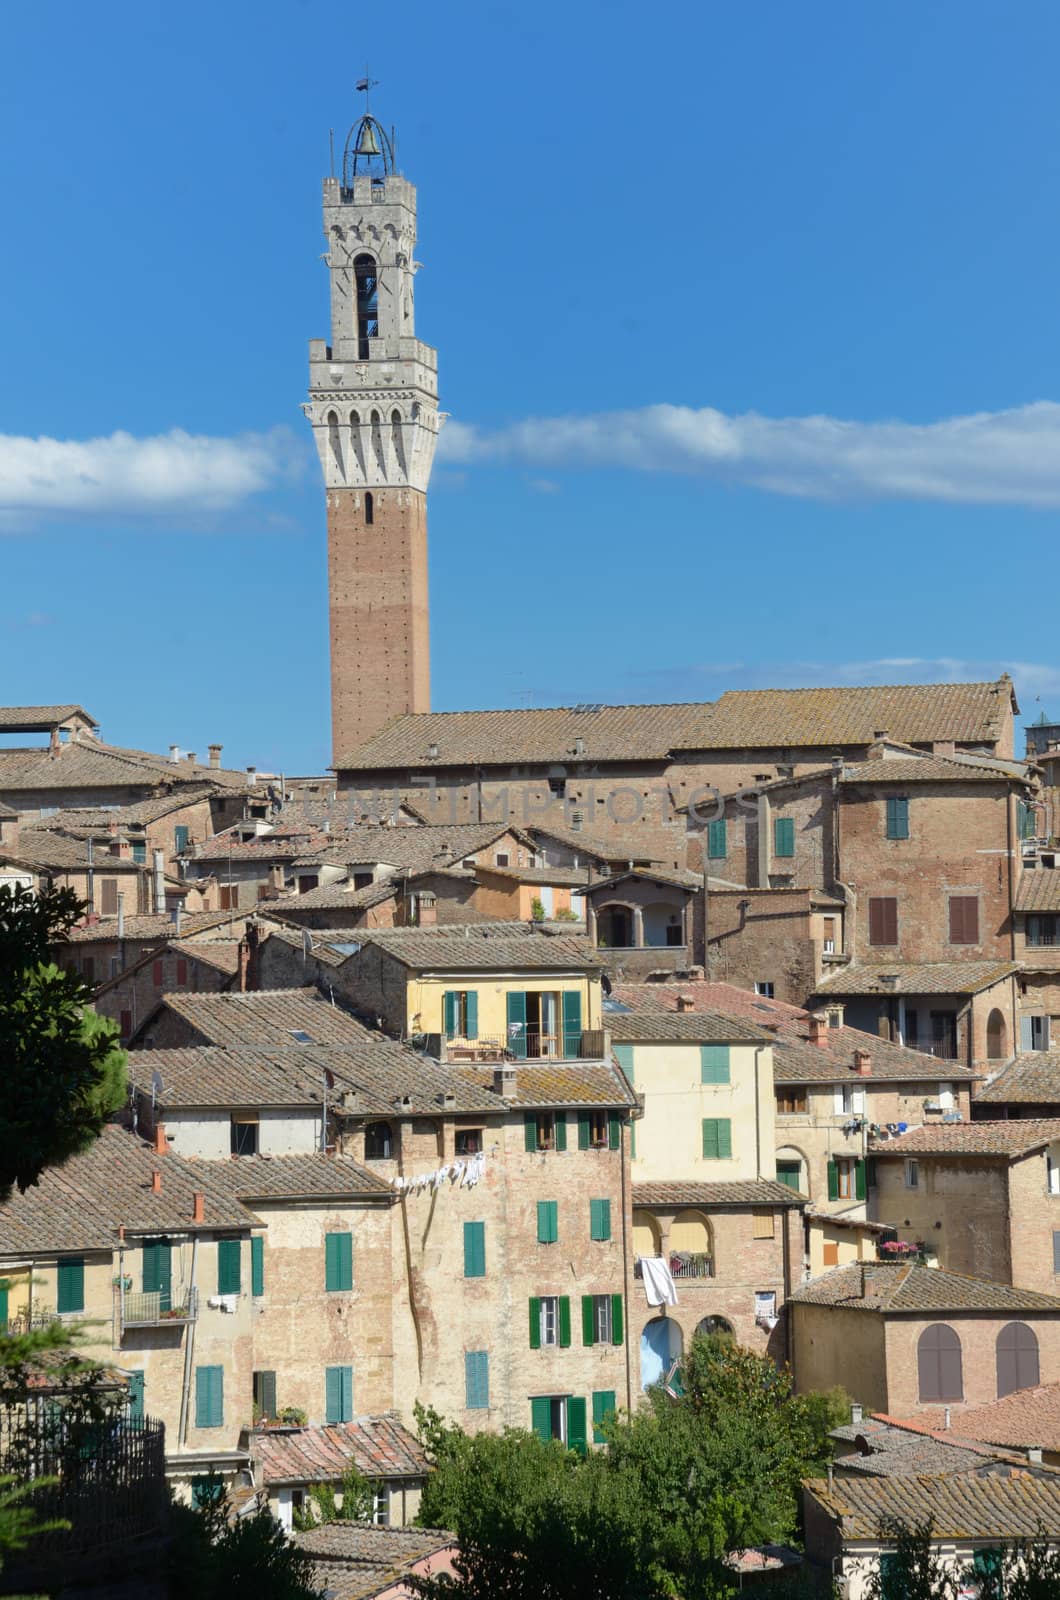 Siena is a jewel of the tuscan medieval architecture